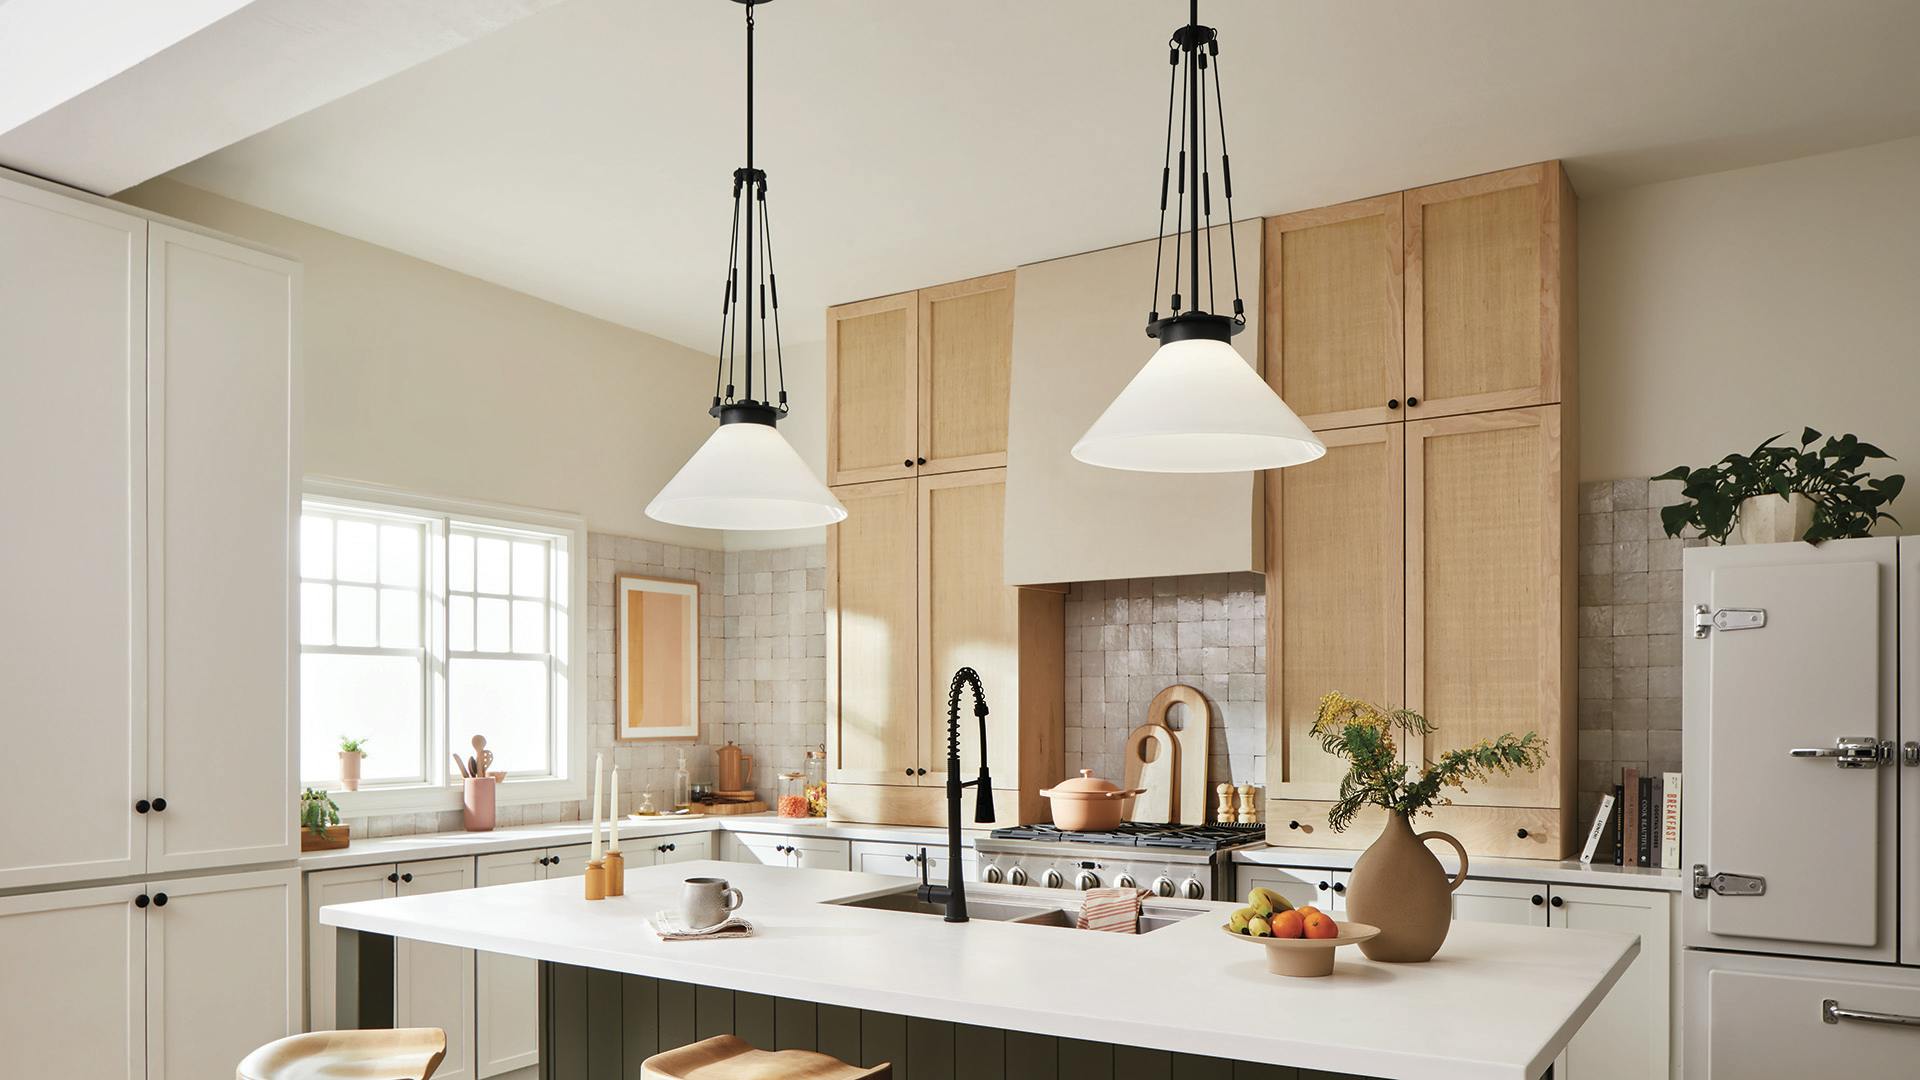 Open concept kitchen with Albers pendants hanging above a kitchen island